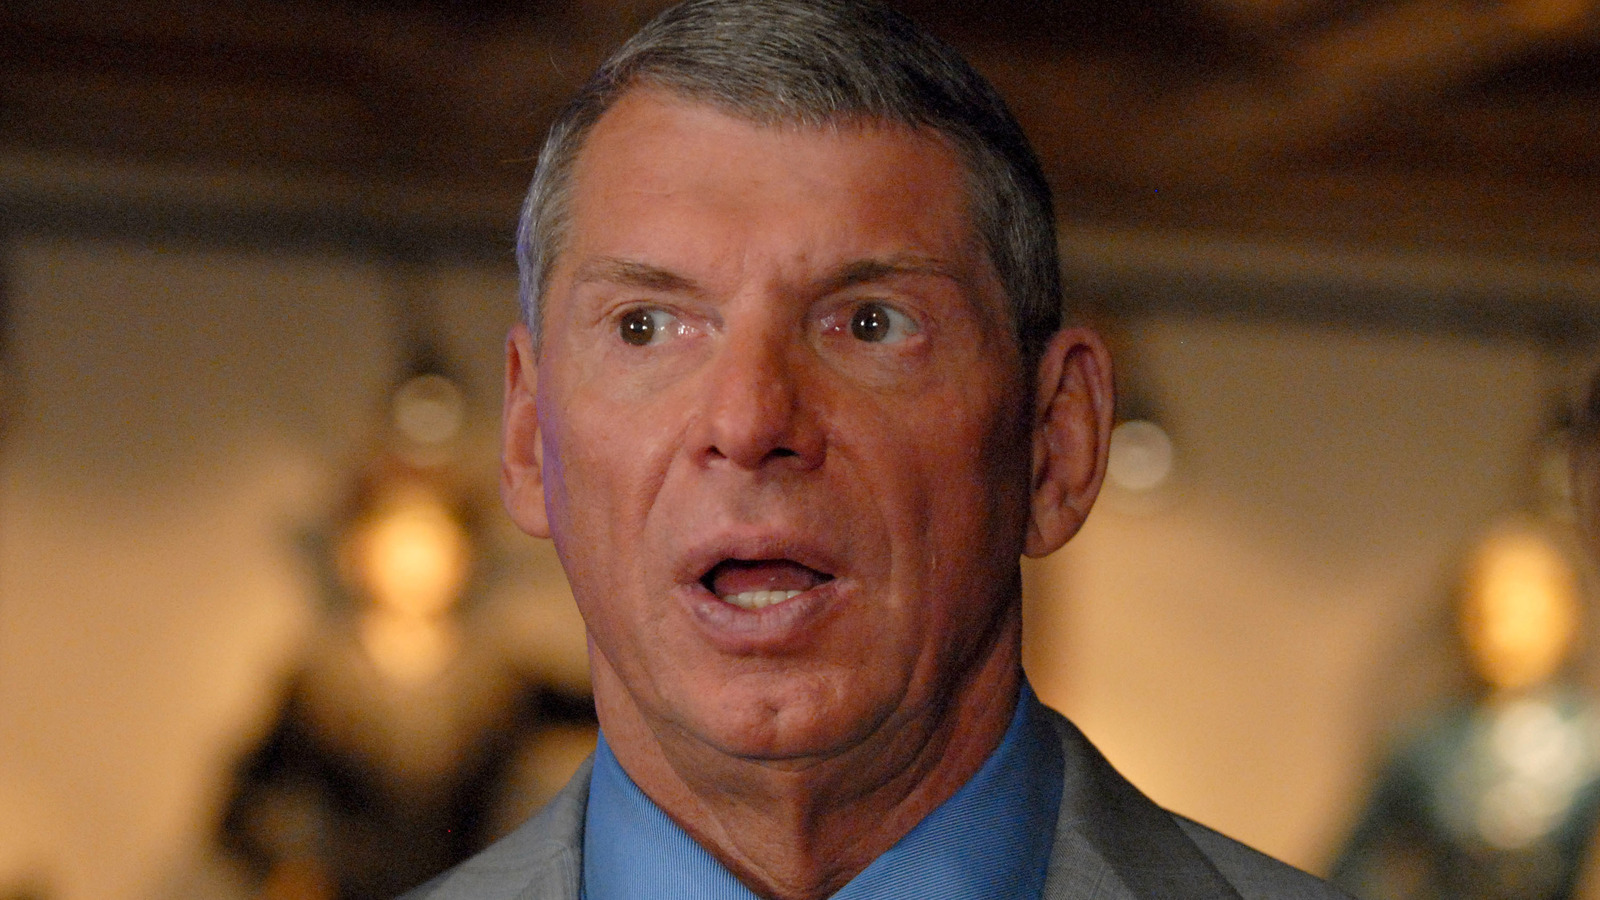 WWE Hall of Famer Eric Bischoff is at a loss for words about Vince McMahon's lawsuit